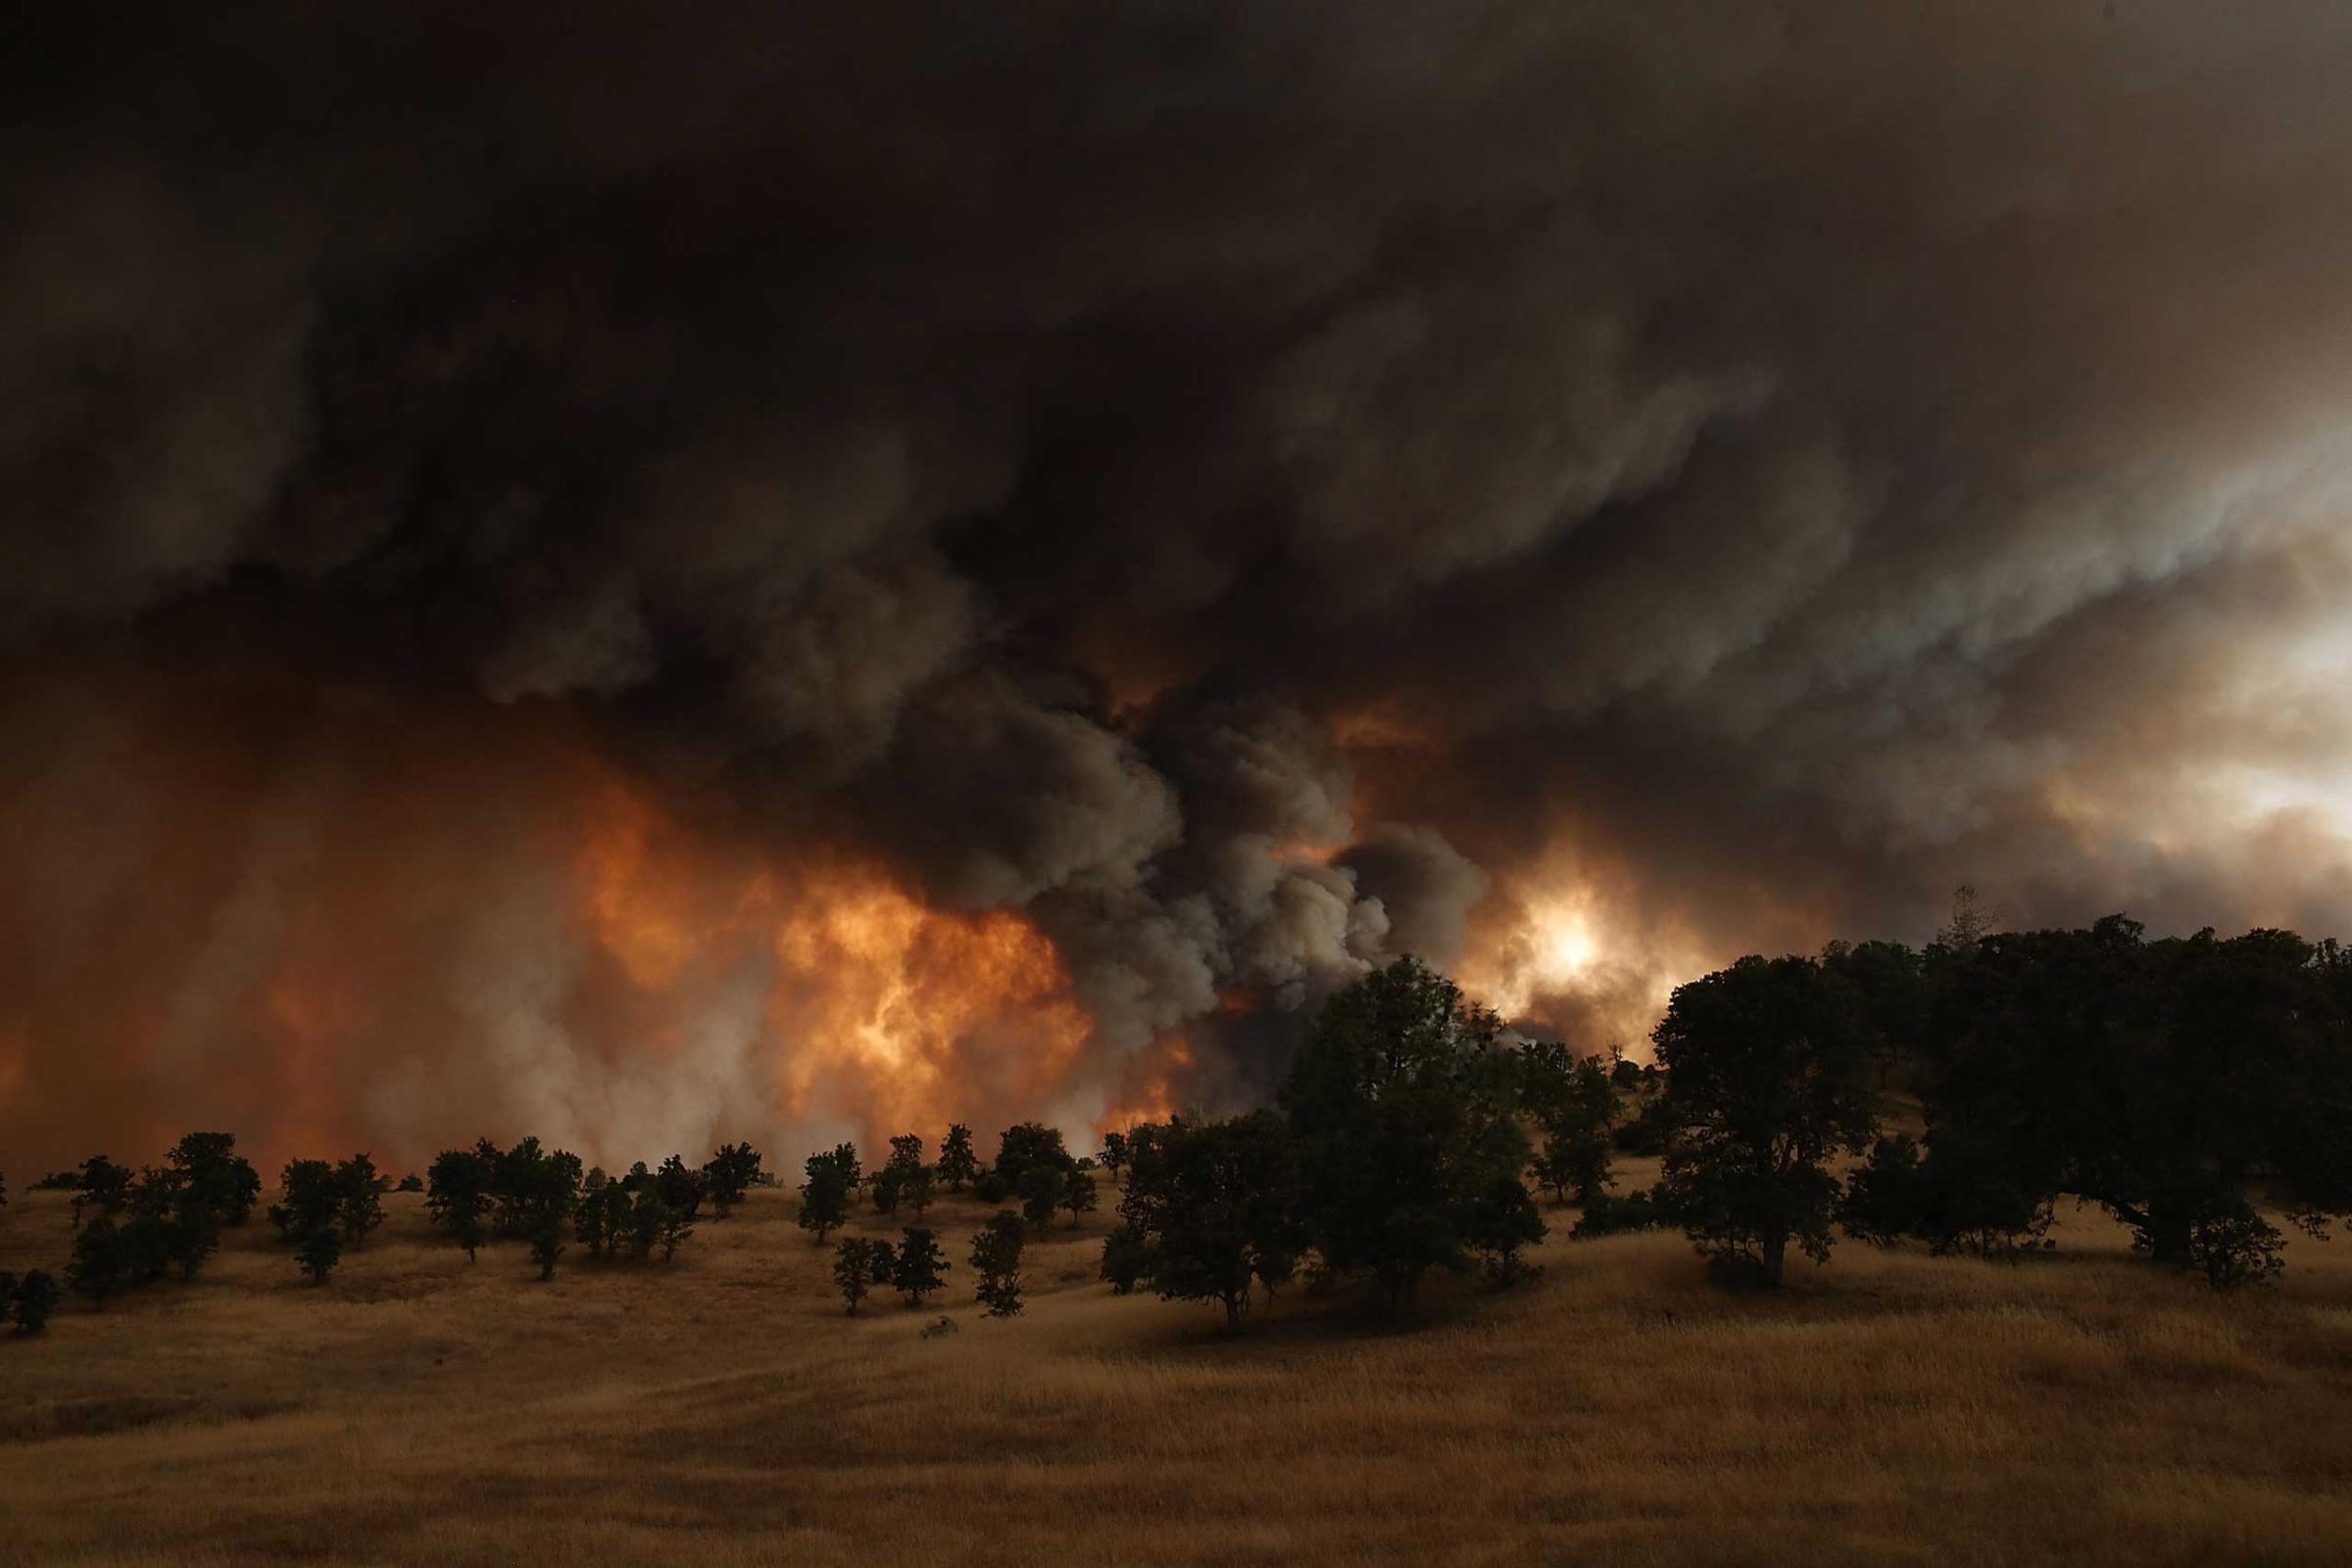 A large plume of smoke rises from the Rocky Fire near Clearlake, California. Over 1,900 firefighters are battling the Rocky Fire that burned over 22,000 acres since it started earlier that week. The fire is currently five percent contained and has destroyed at least 14 homes. Aug. 1, 2015